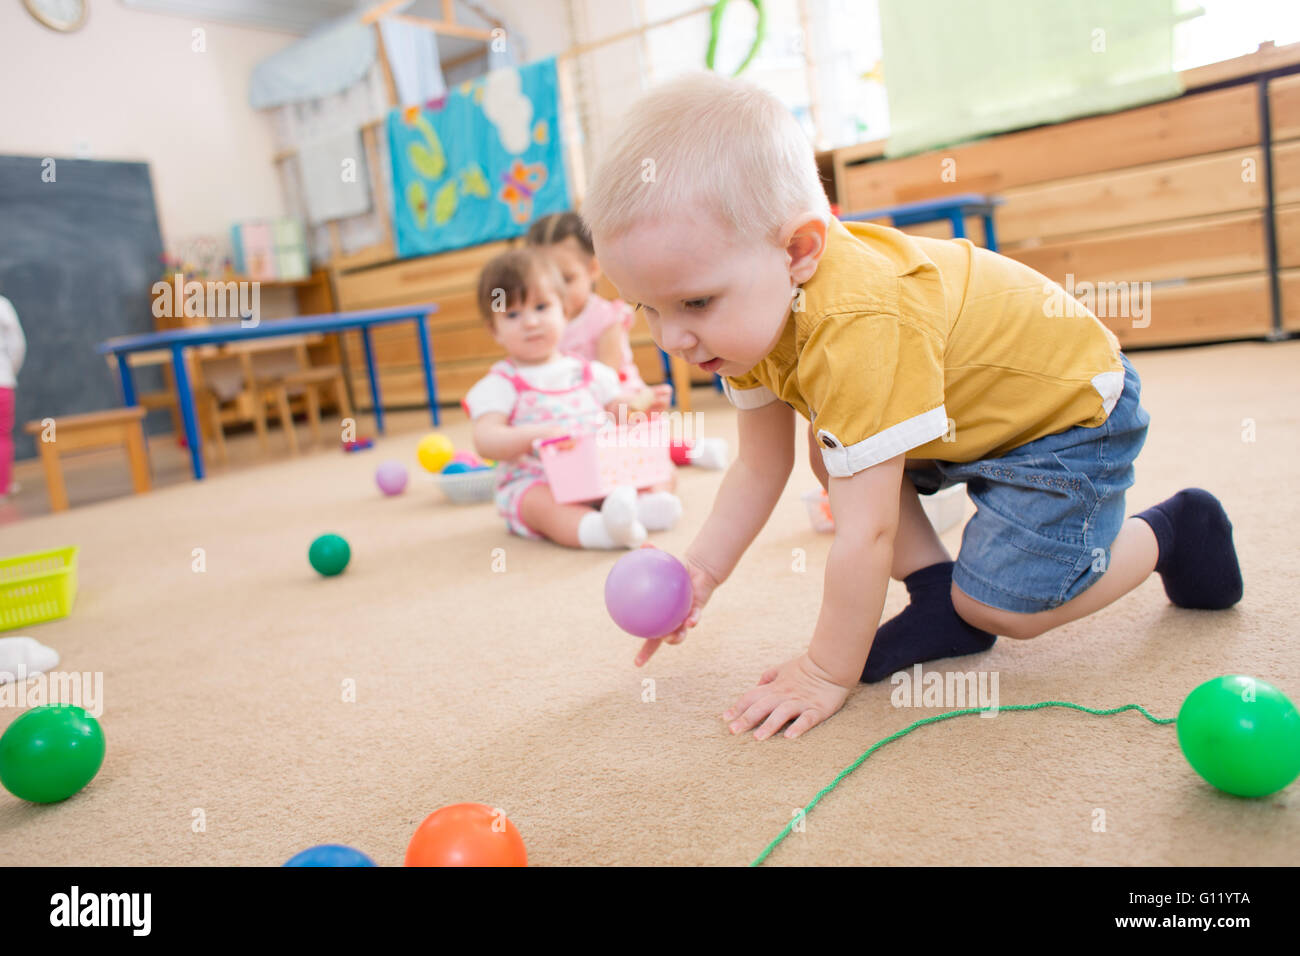 kid playing with balls in kindergarten Stock Photo